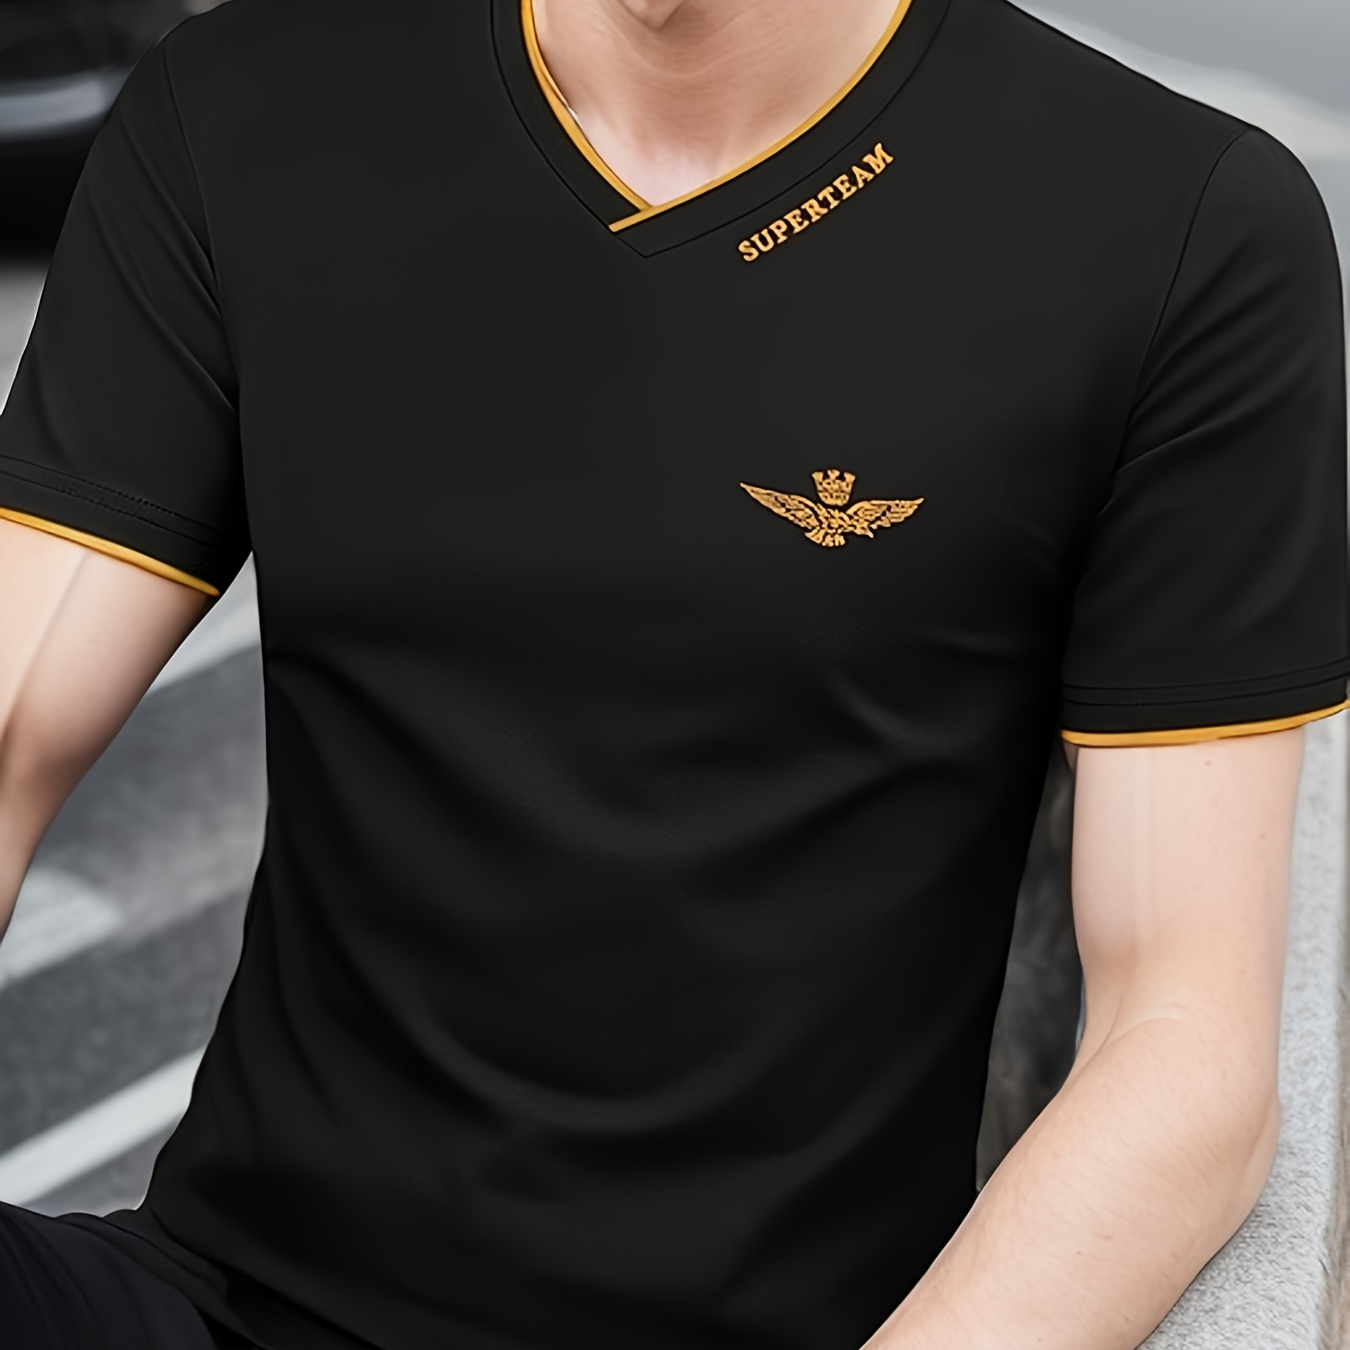 

Men's Summer Fashion Eagle With Crown Label Pattern V-neck And Short Sleeve T-shirt, Classic And Chic Tops For Casual And Outdoors Wear